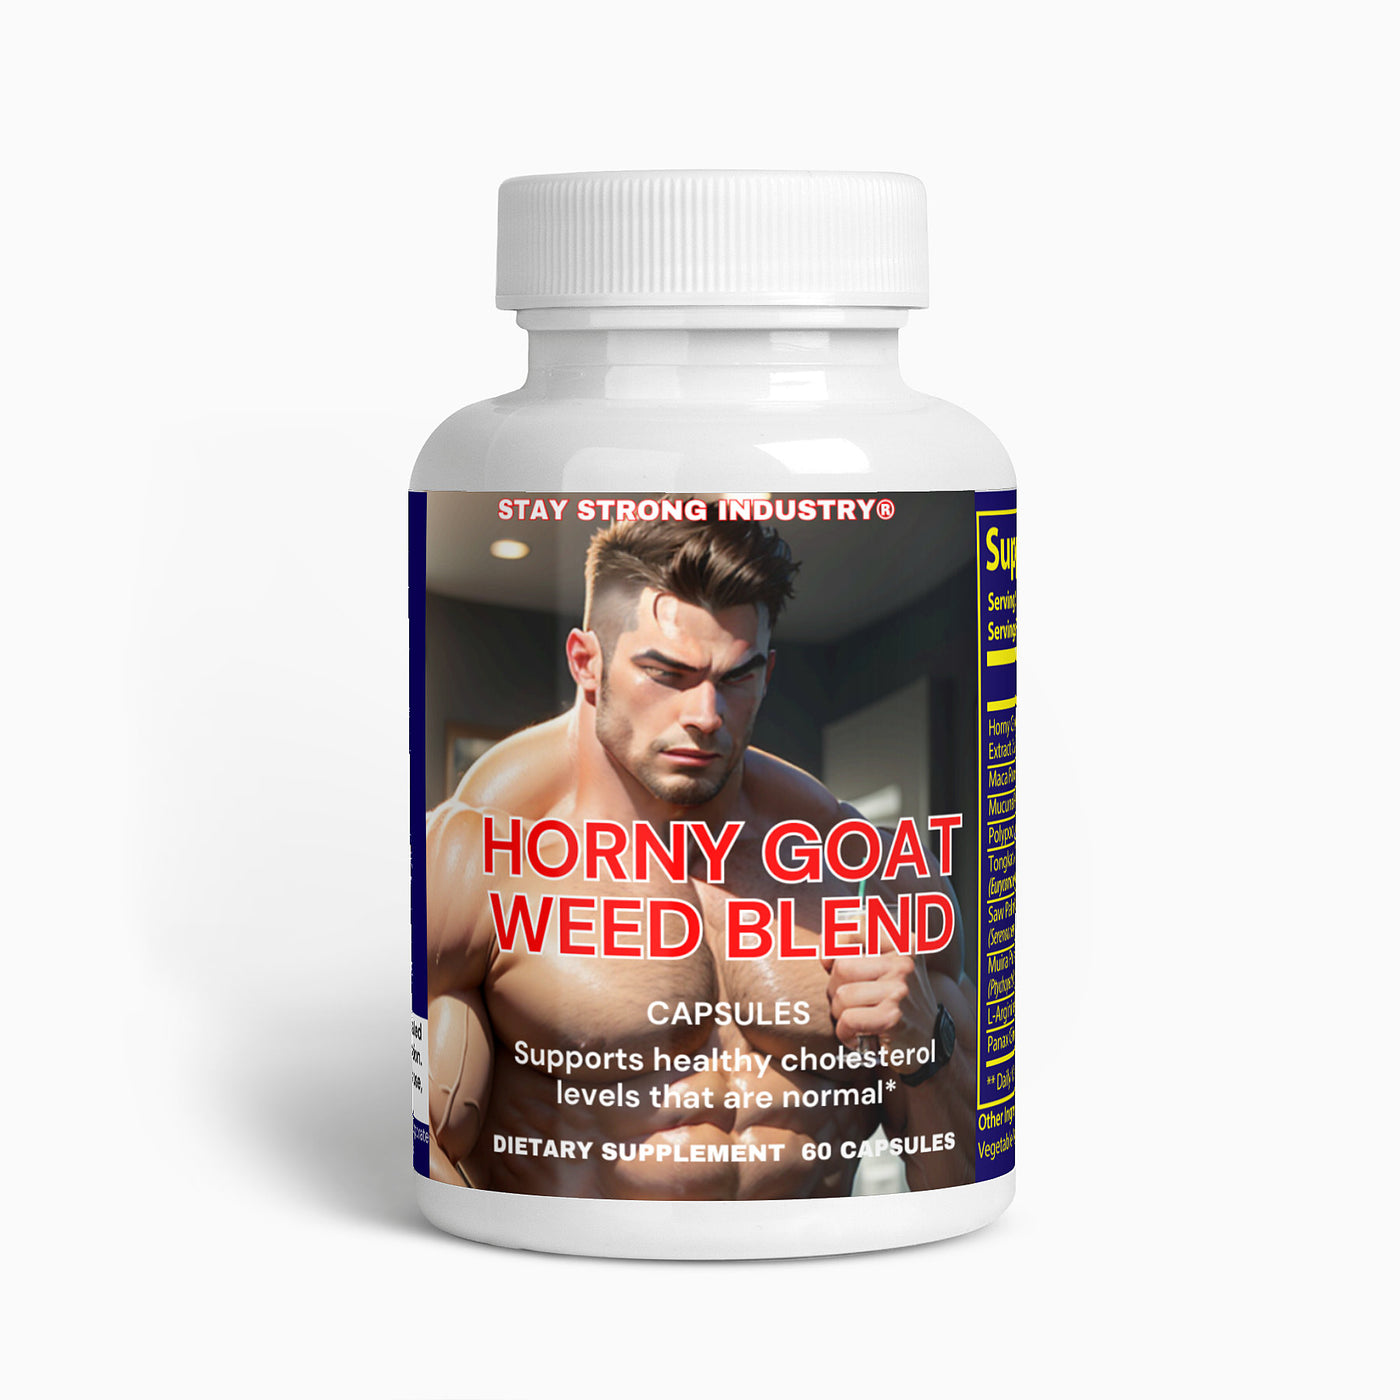 Horny Goat Weed Blend  "STRONGER & HARDER THAN LAST TIME "